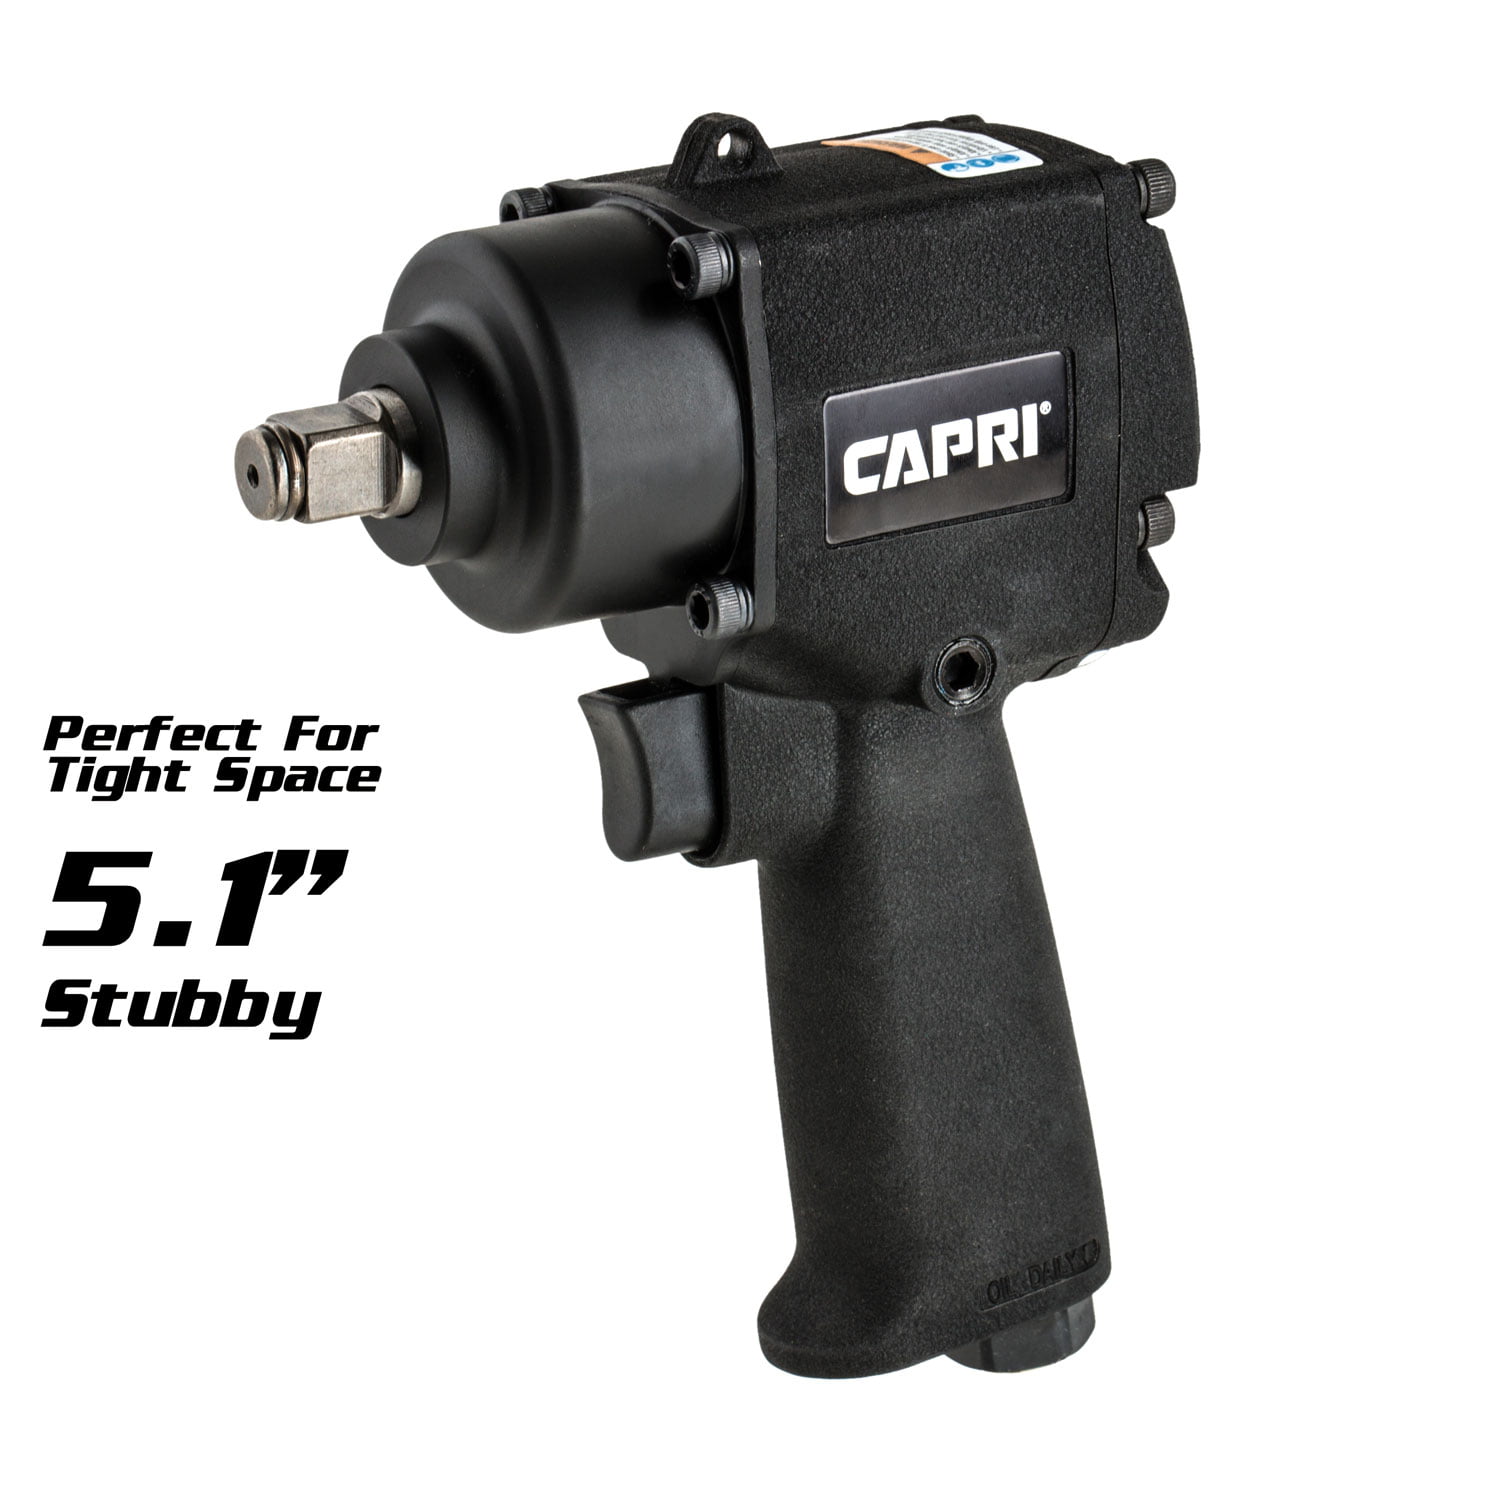 Capri Tools 3/8 in 320 ft lbs. Stubby Air Impact Wrench 